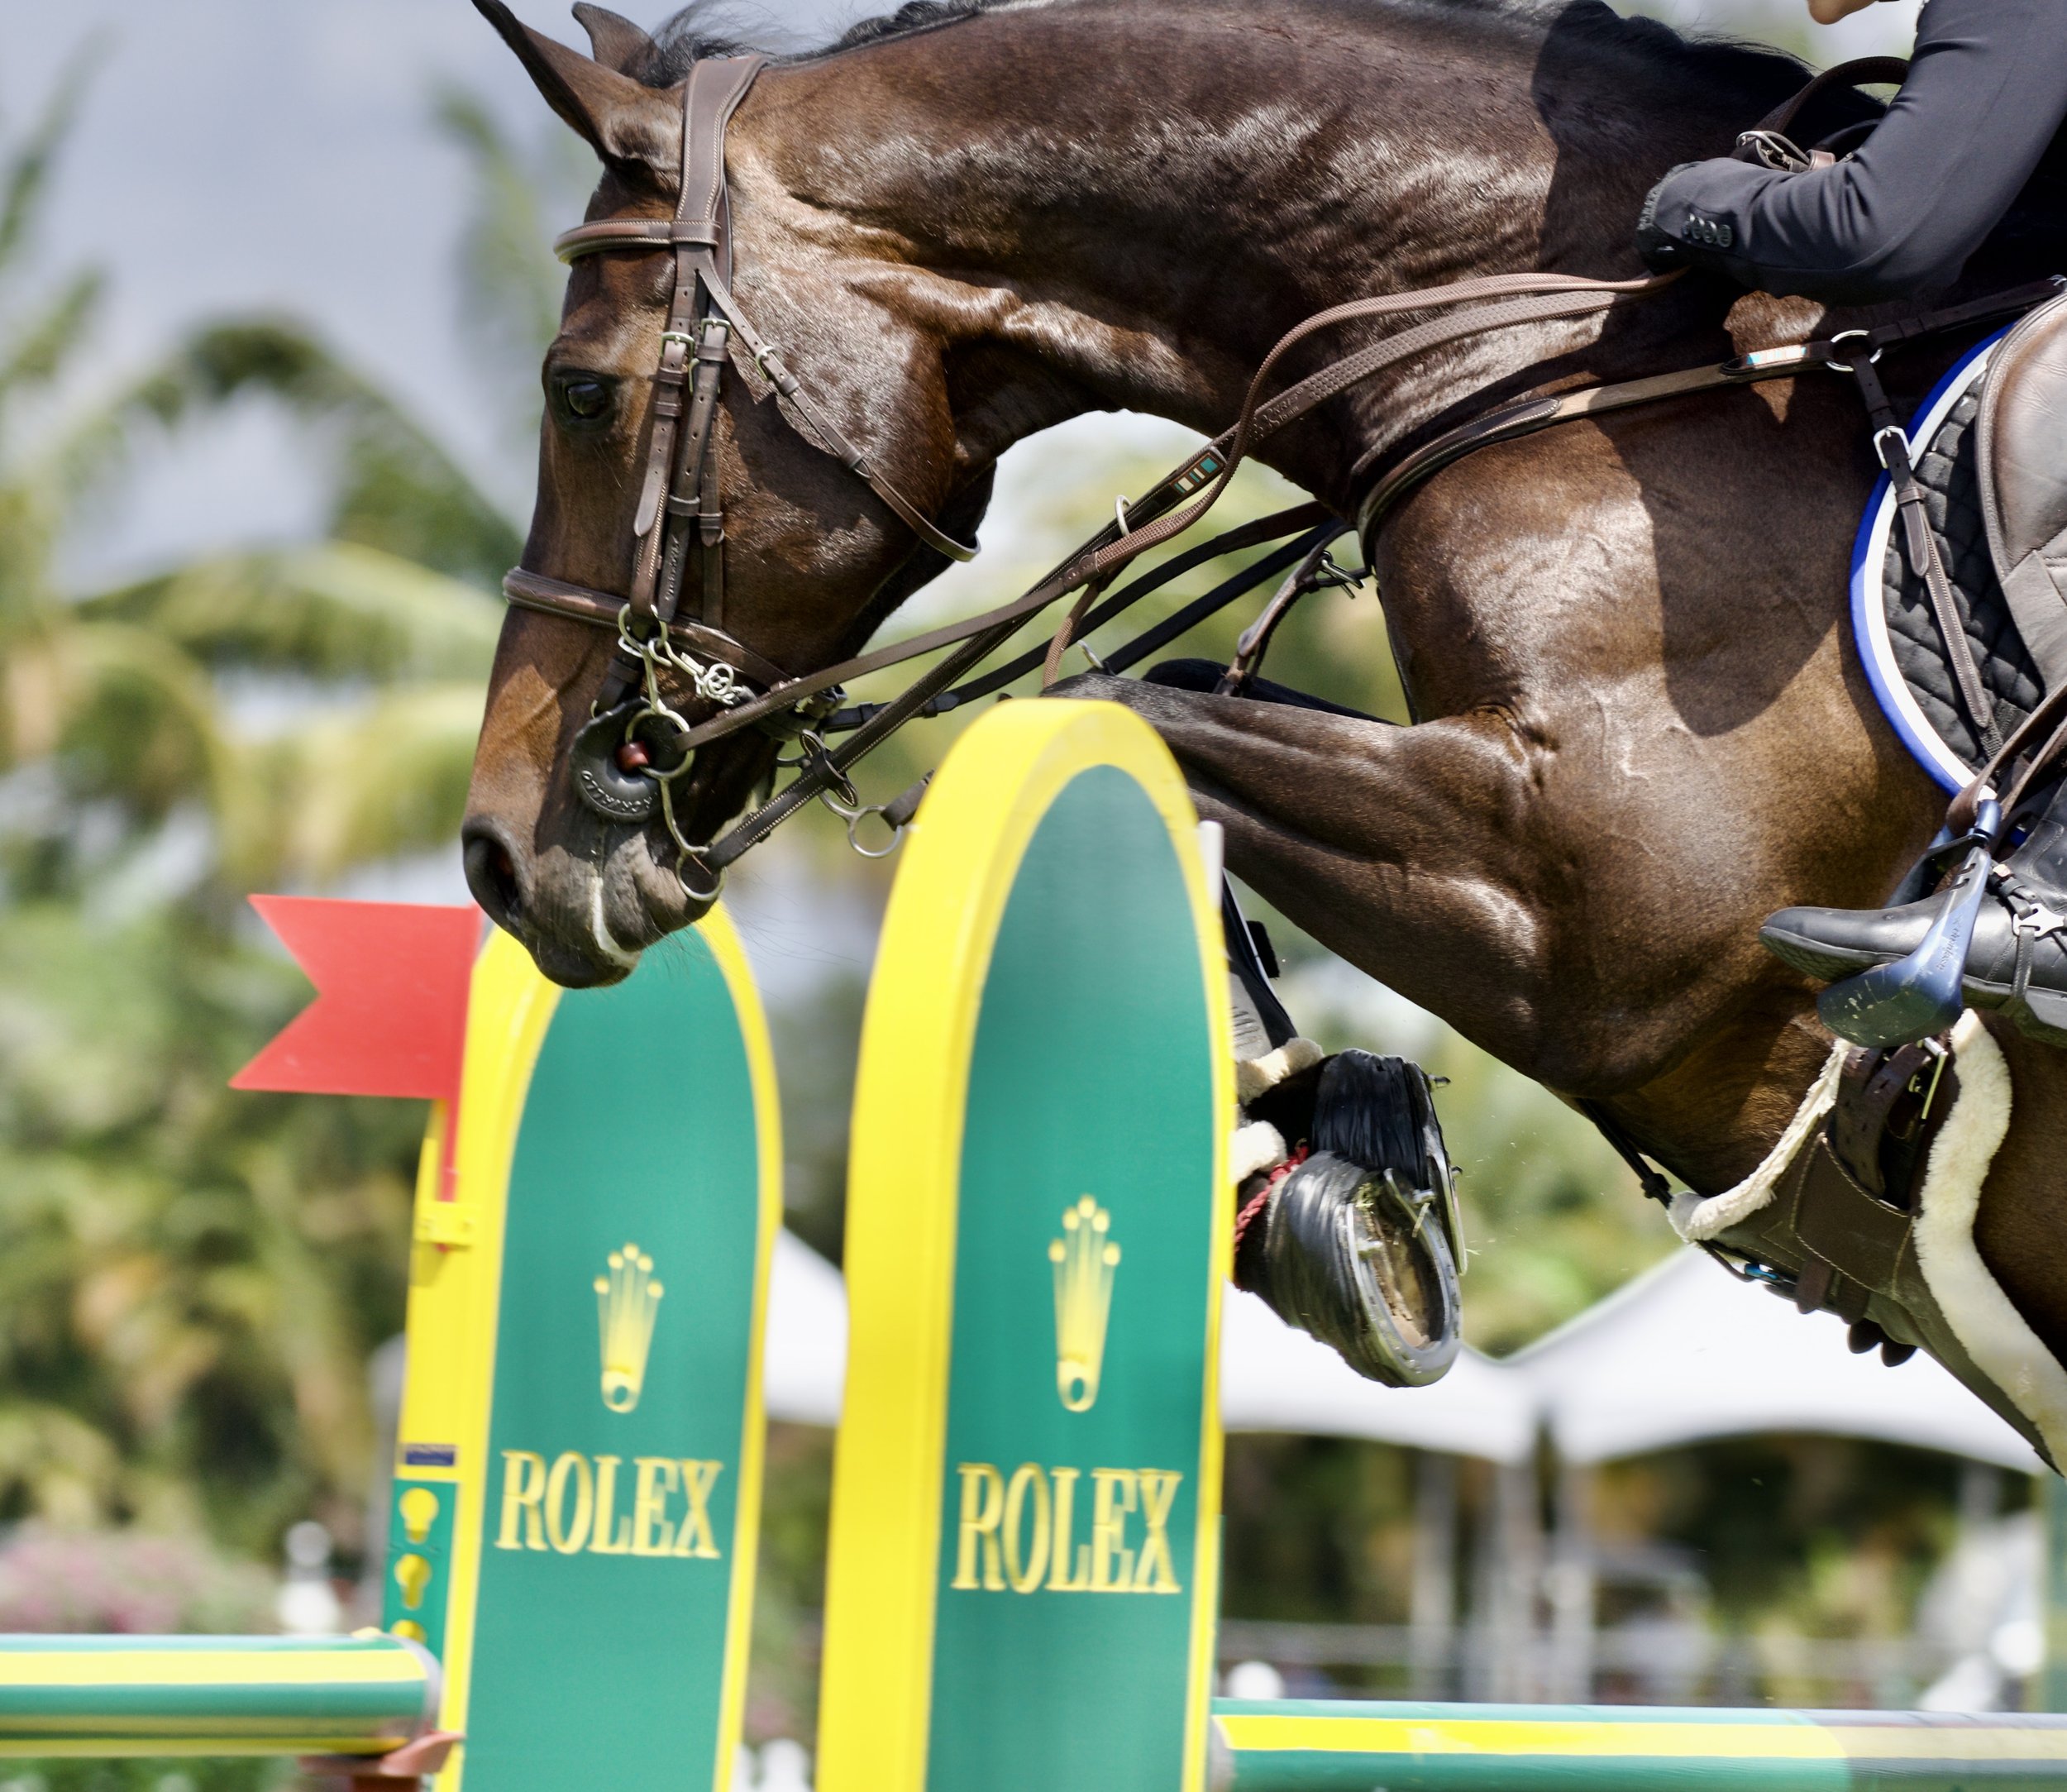 Power pony - Bond's Korra flying over the final Rolex obstacle